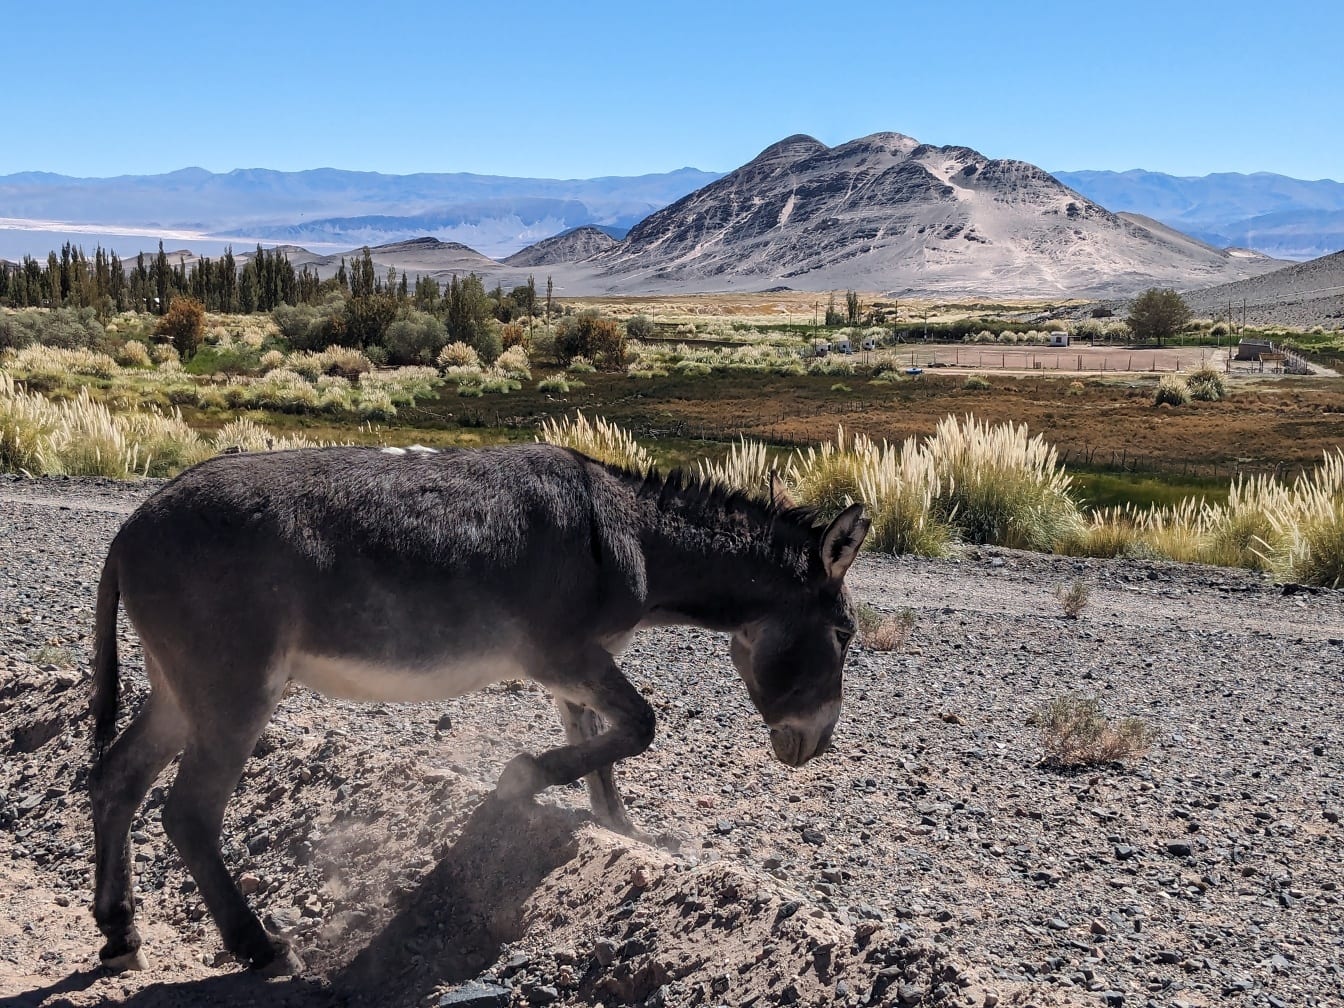 Donkey (Equus asinus asinus) walking on a dusty road on Andean plateau